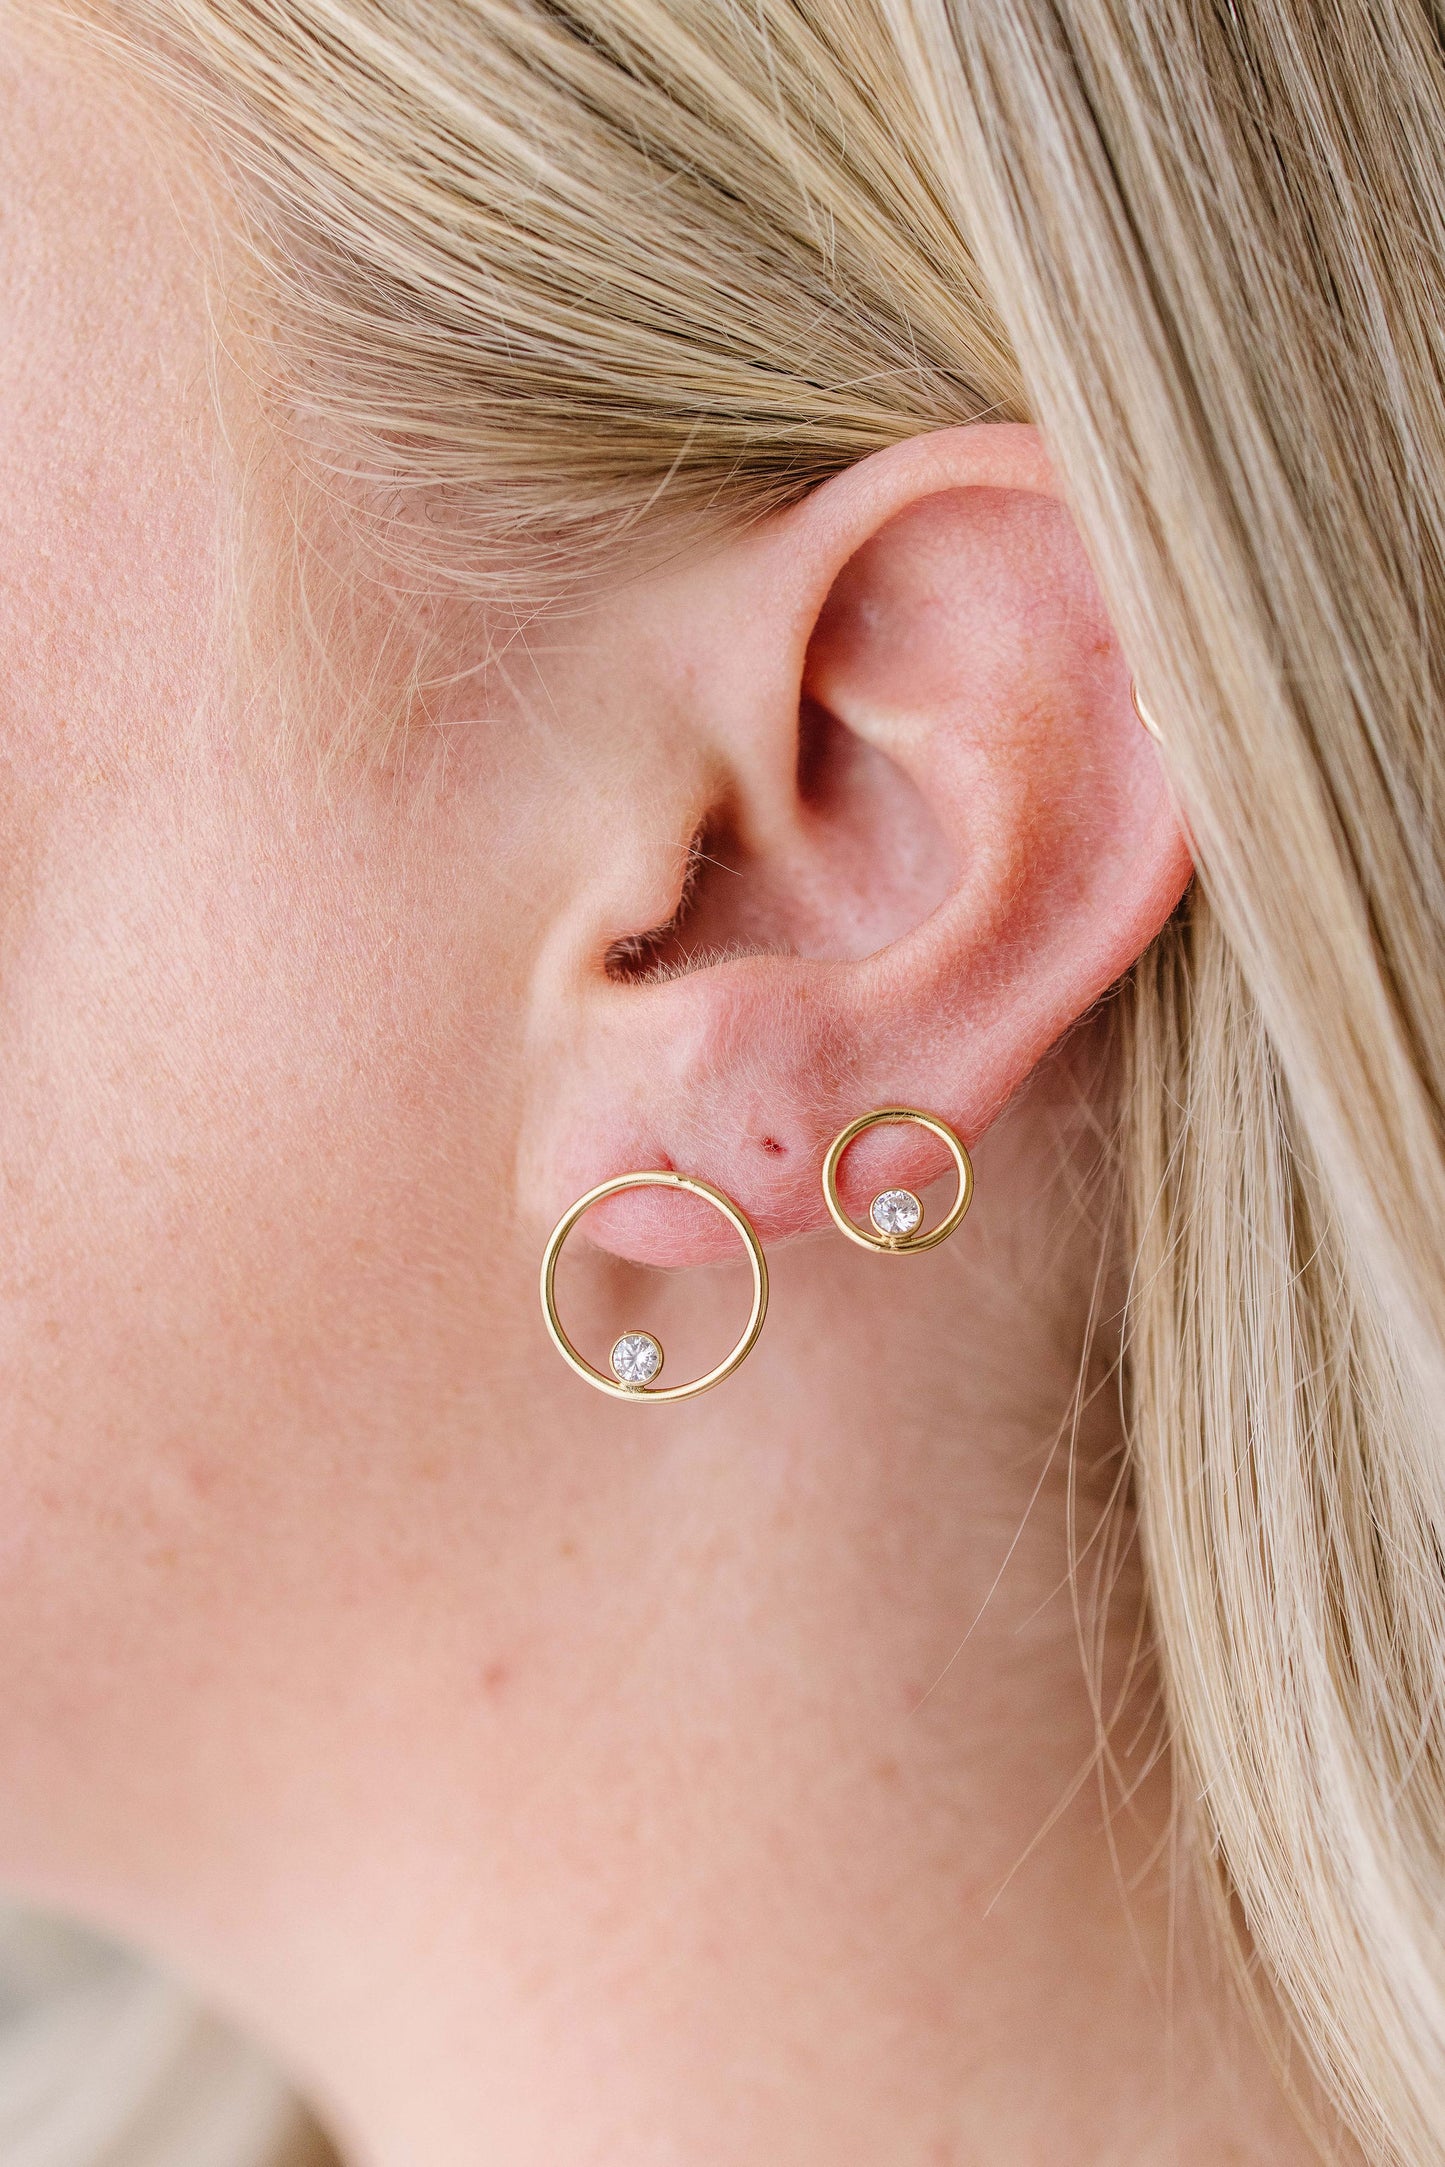 Circle stud earrings. gold filled circle stud earrings. gold circle earrings. circle frame stud earrings. gems by Laura. Essence studs. 